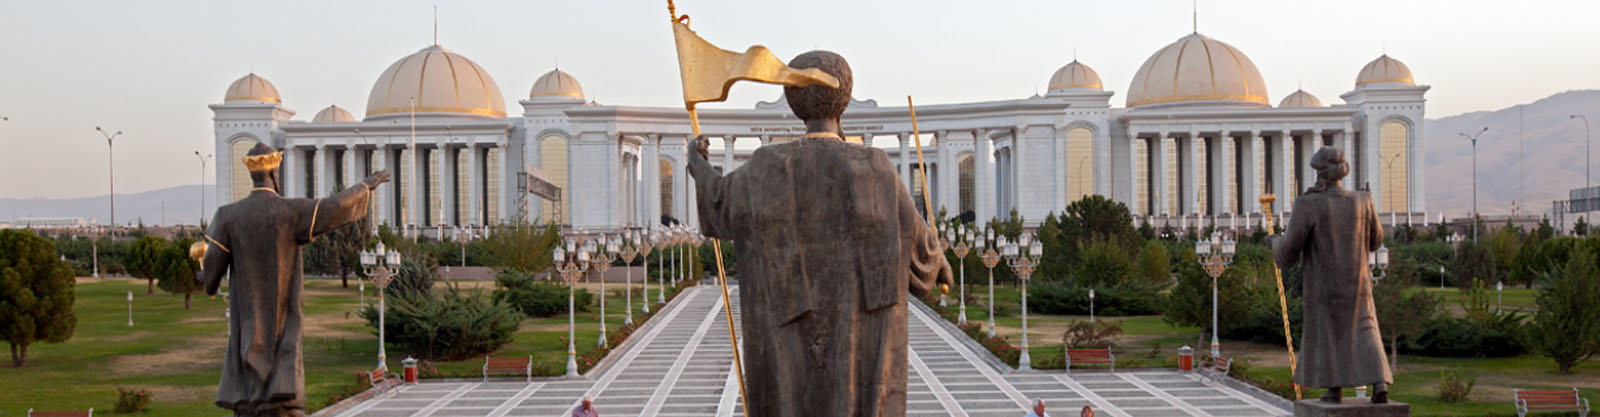 things-to-do-in-ashgabat-banner